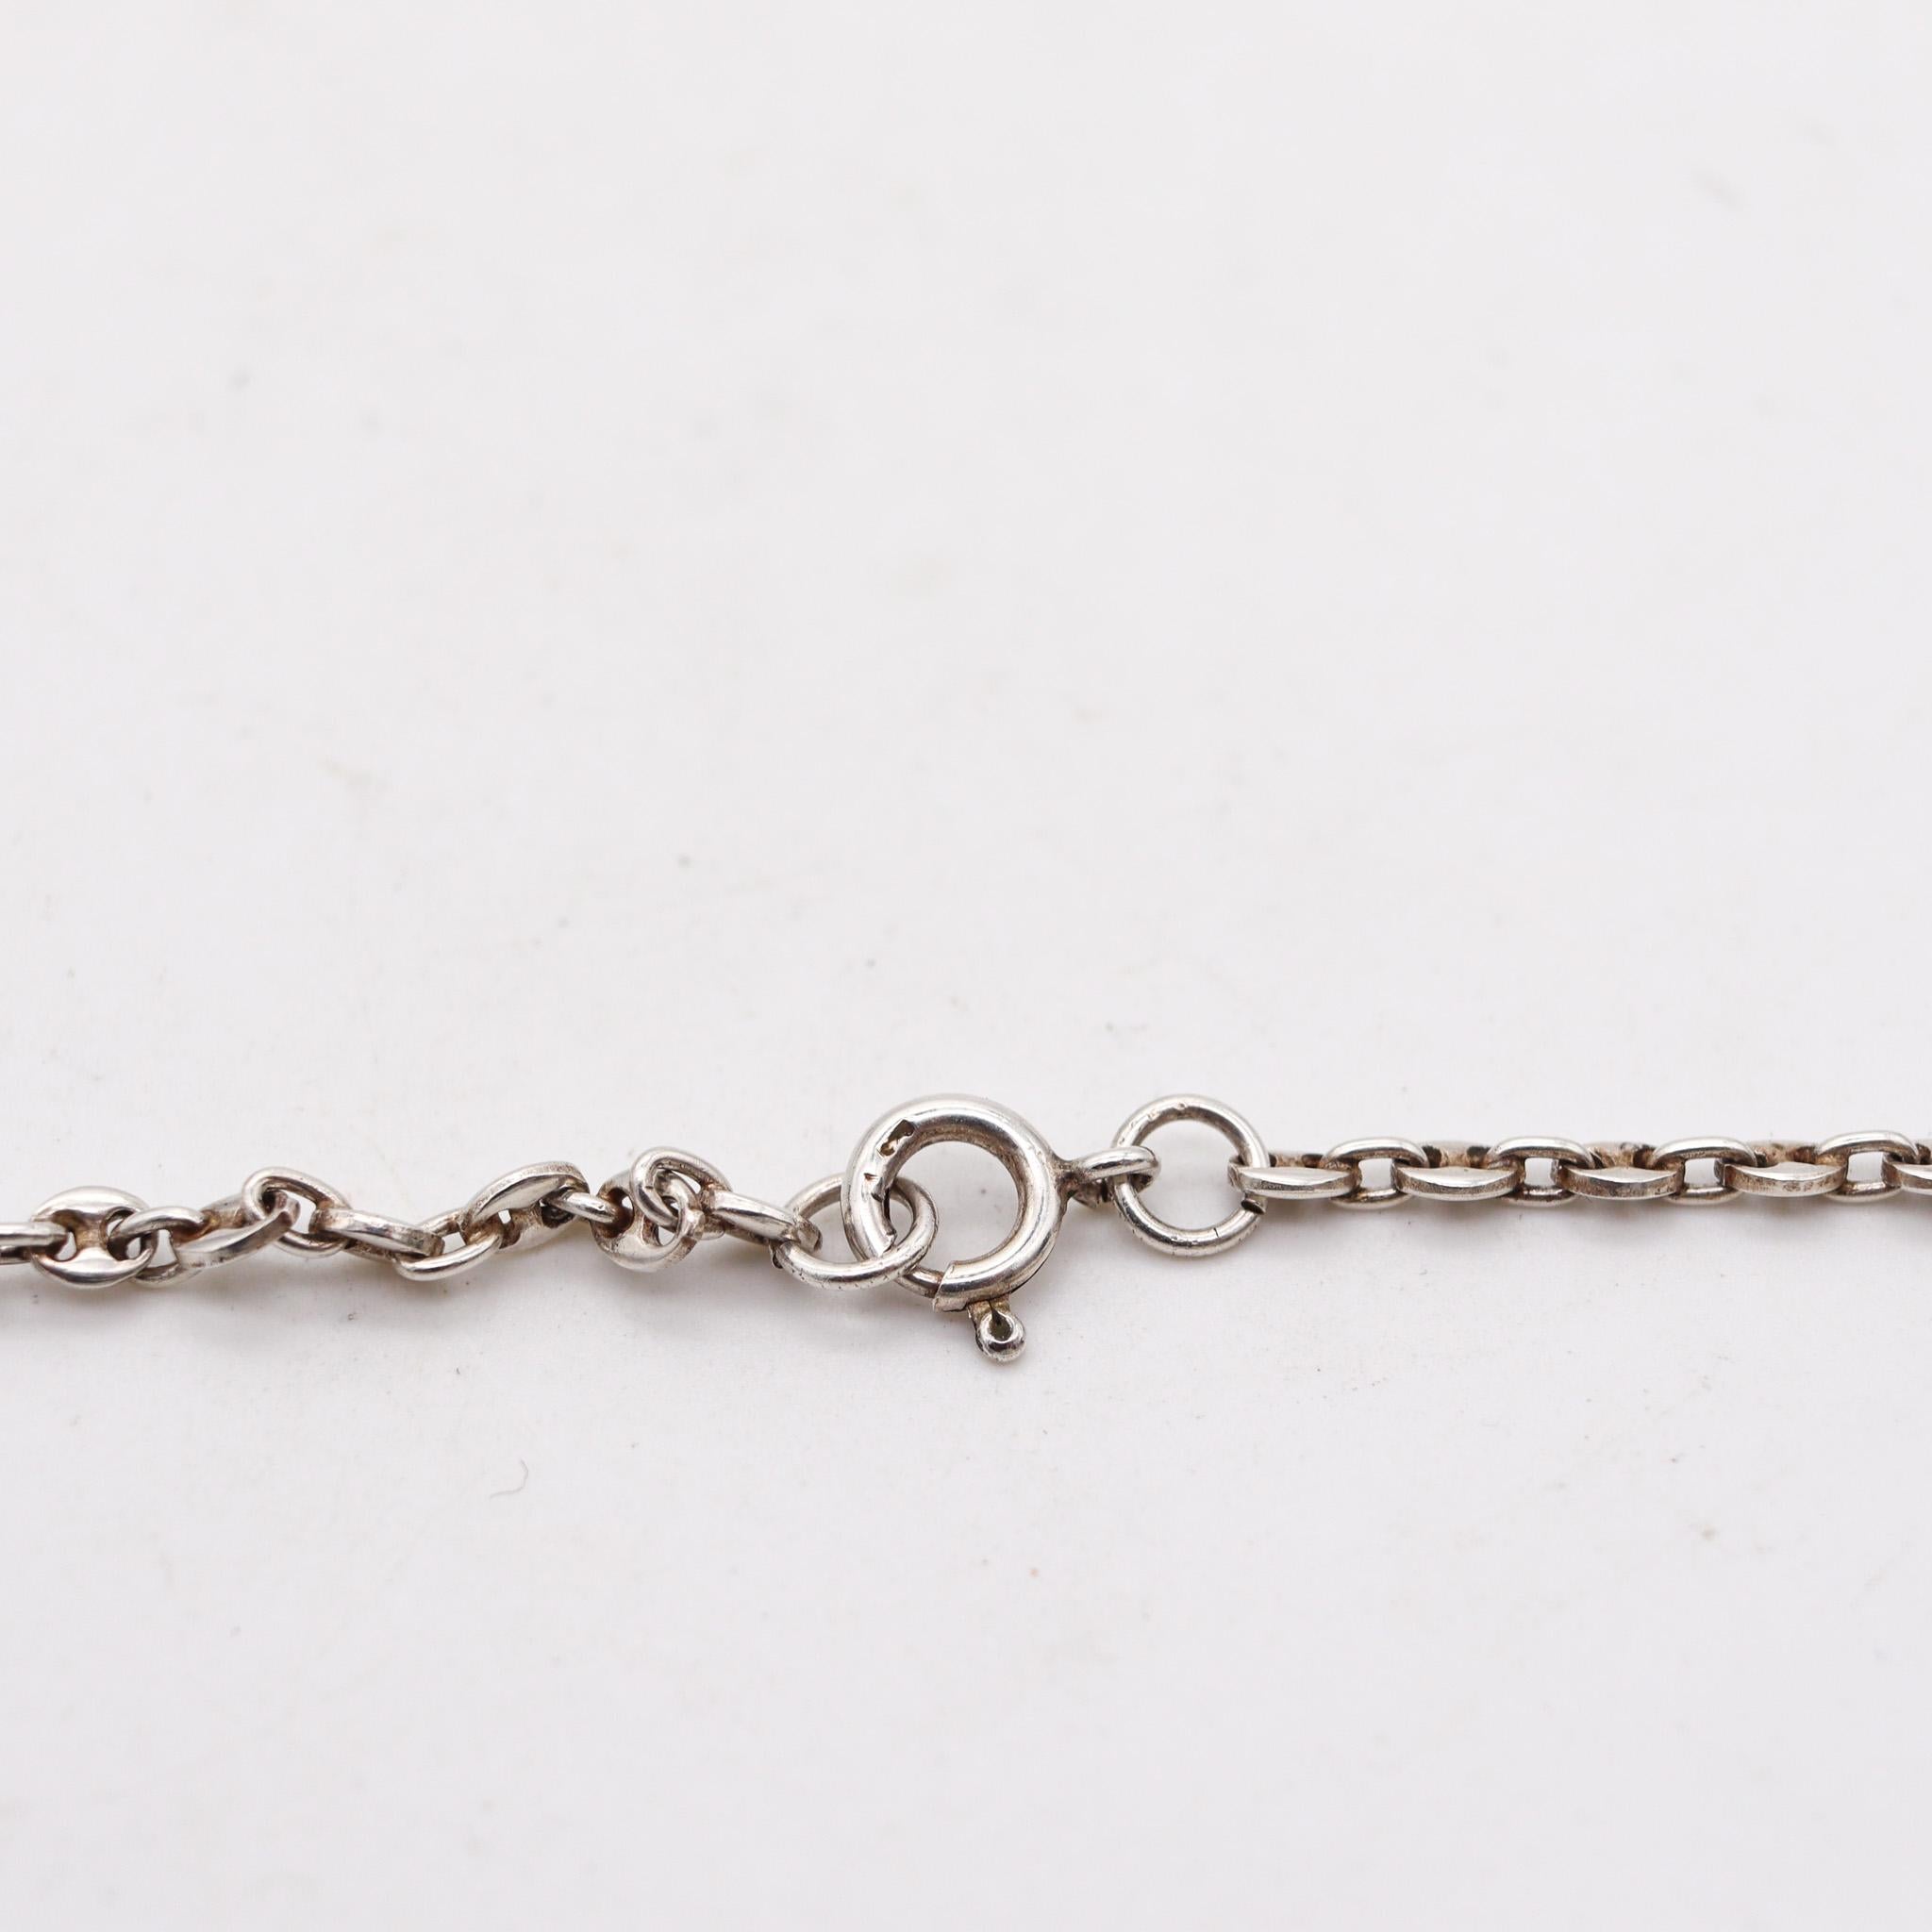 Arezzo 1960 Italian Modernist Long Sautoir Necklace In .925 Sterling Silver For Sale 1